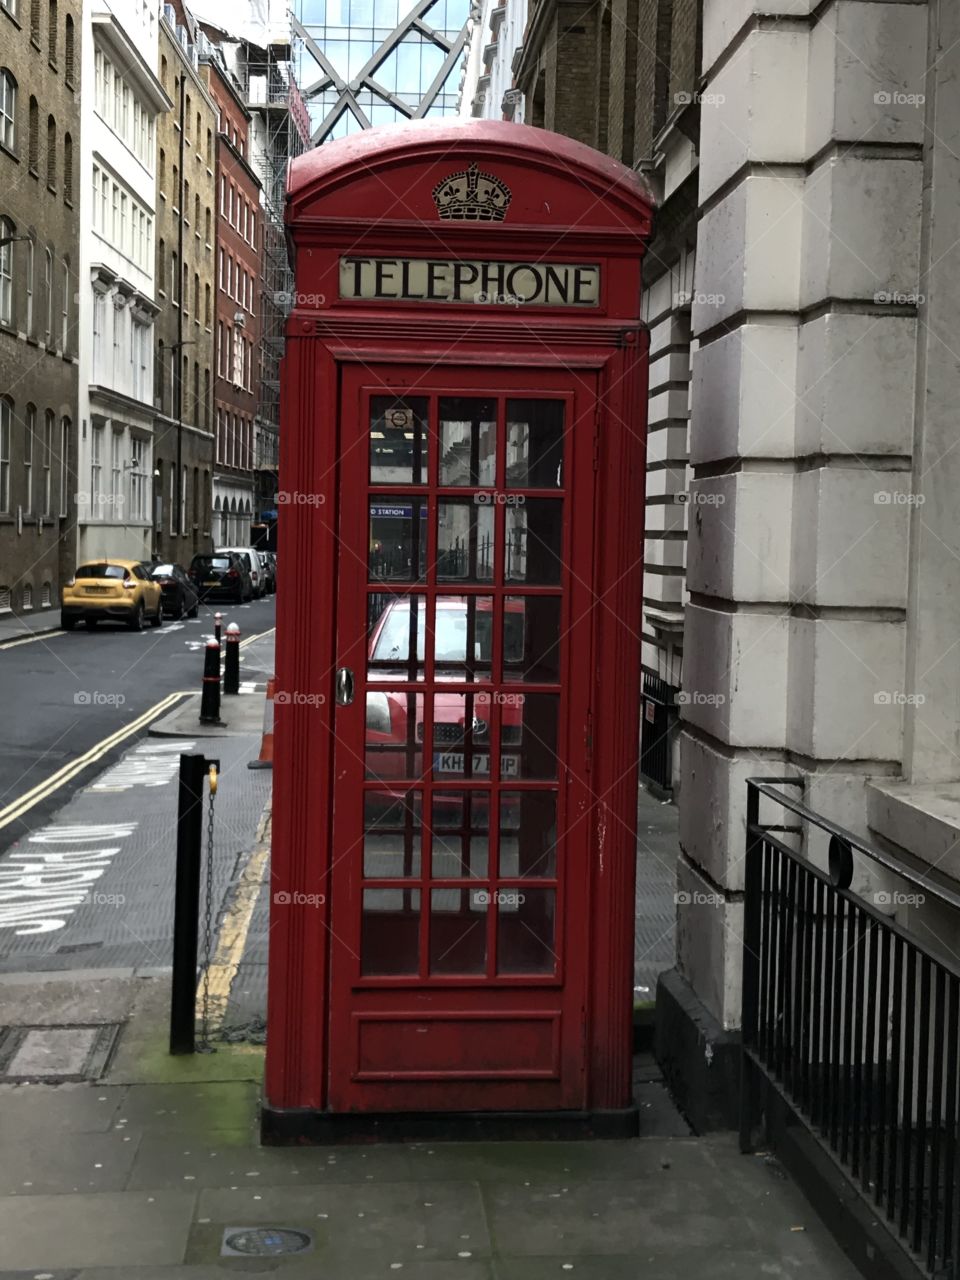 Nice red telephone booth in London